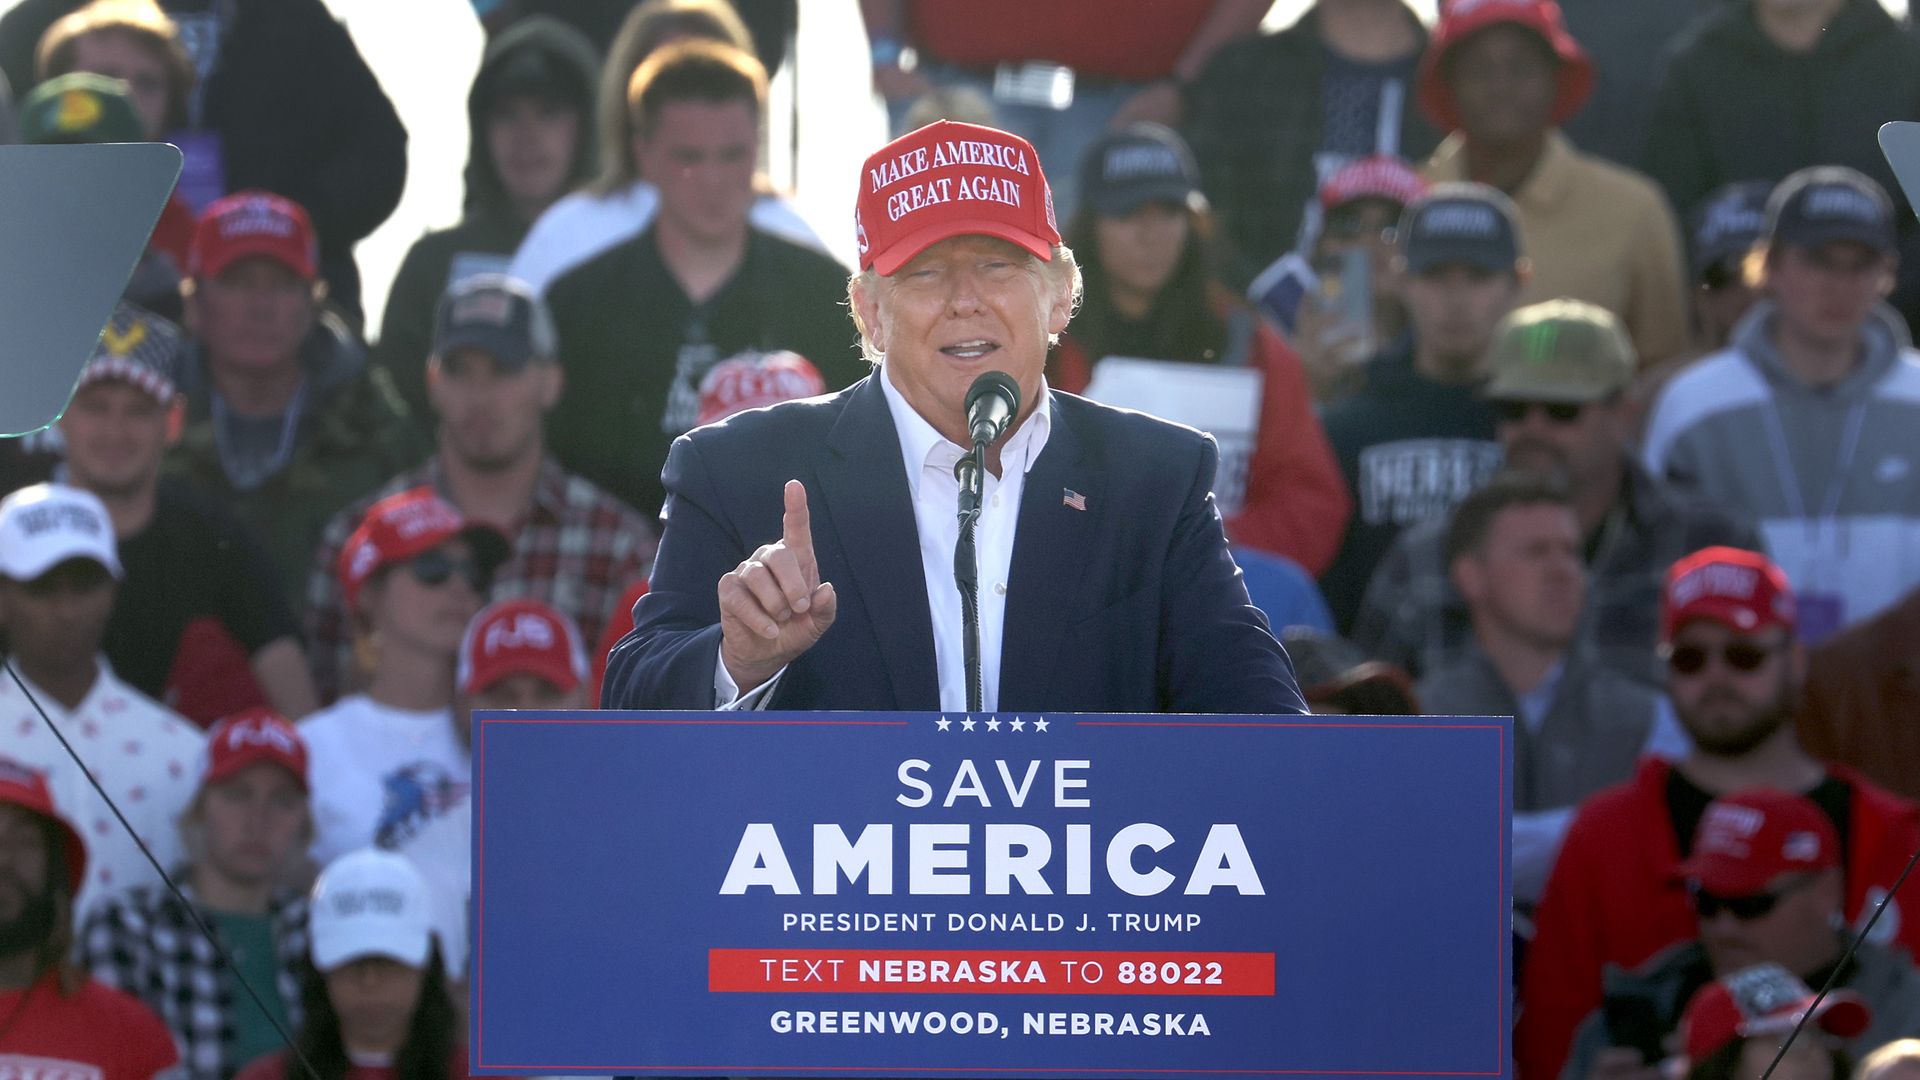 Photo of Donald Trump wearing a red MAGA cap and speaking at a rally from a podium